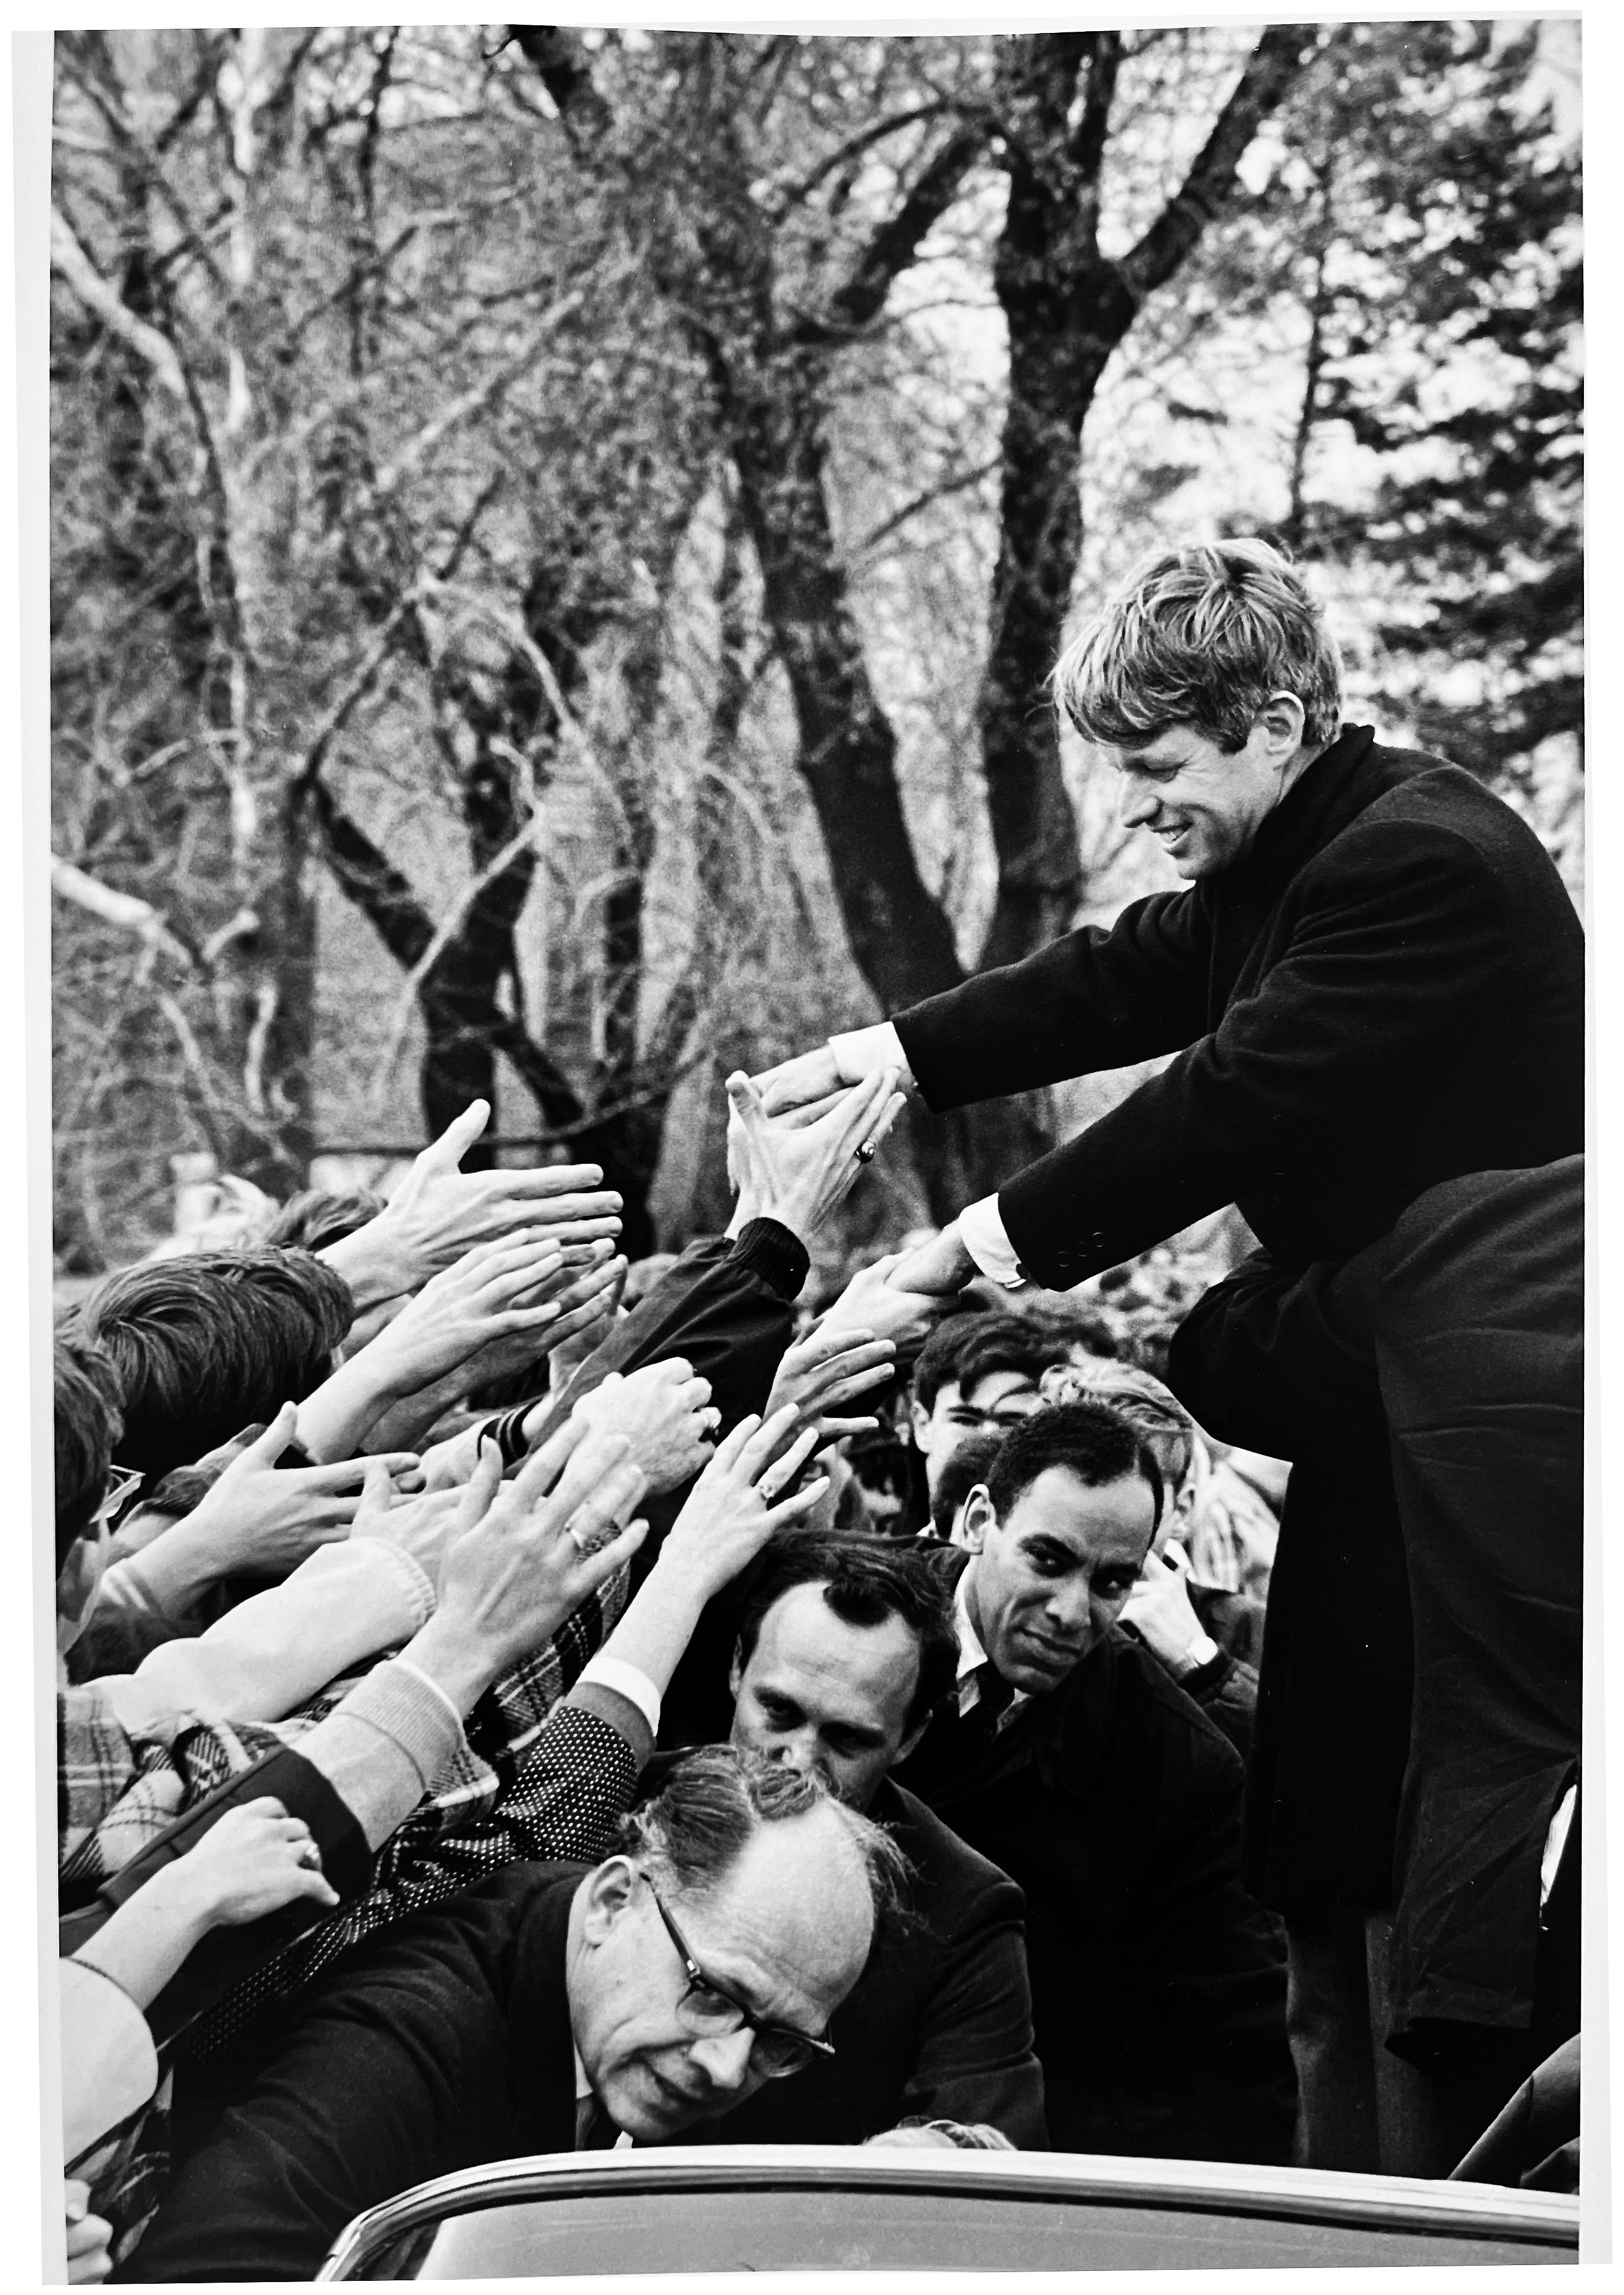 Robert Kennedy (RFK) Campaign Trail, Black and White Portrait Photography 1960s